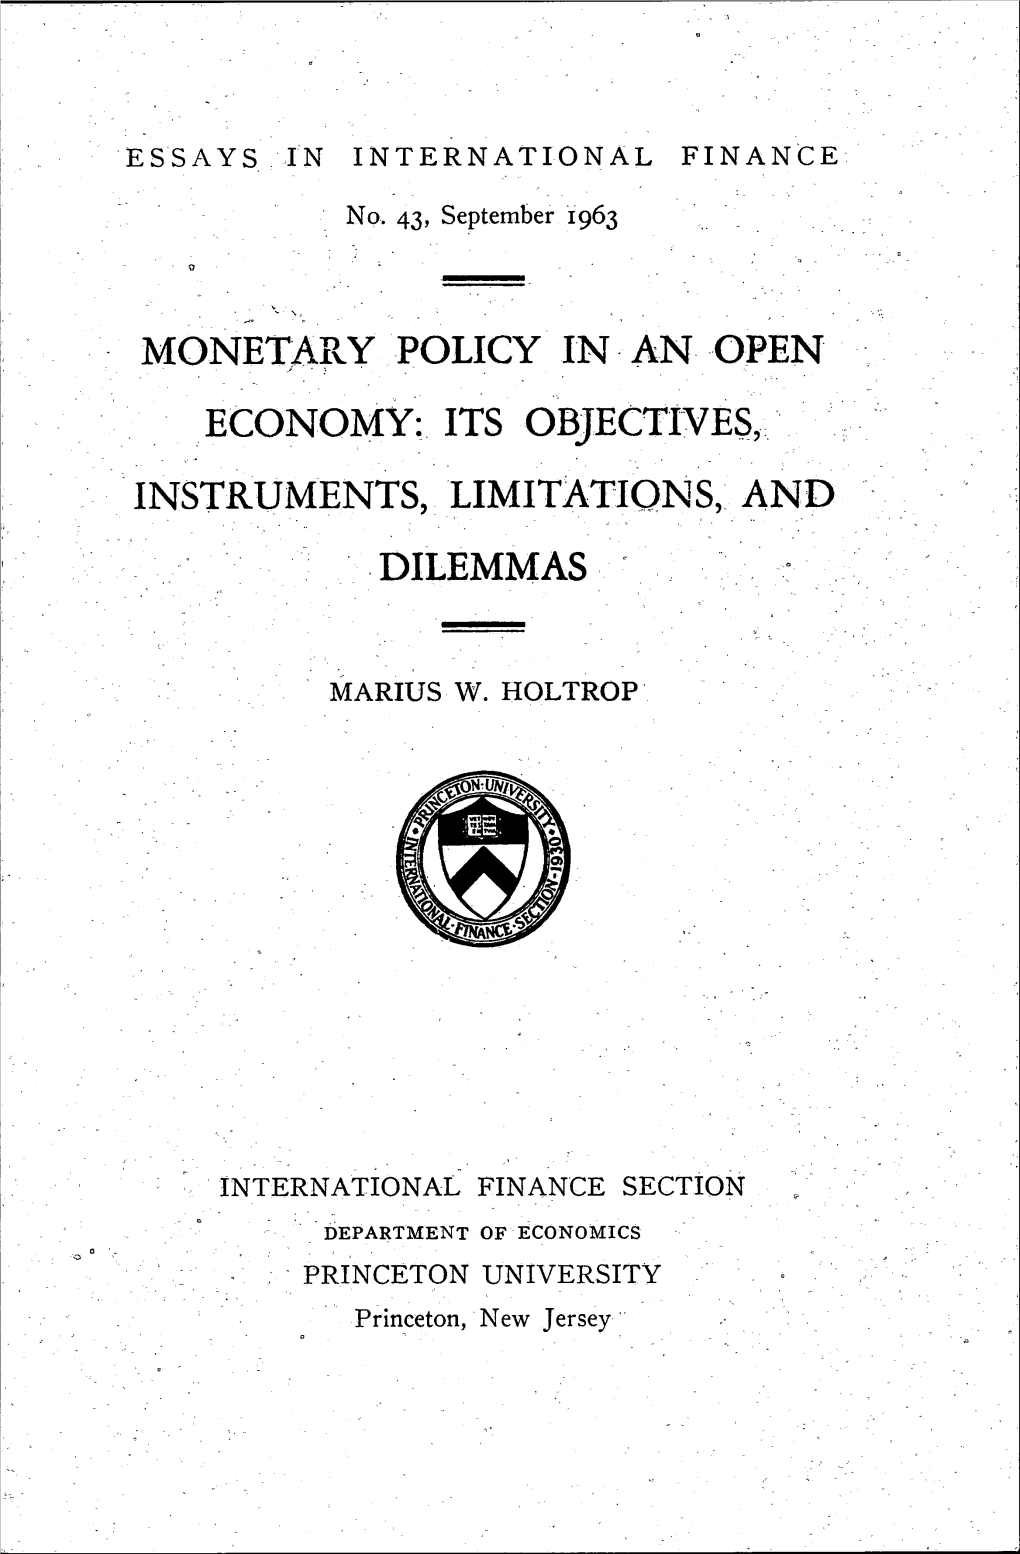 Monetary Policy in an Open Economy: Its Objectives Instruments, Limitations and Dilemmas